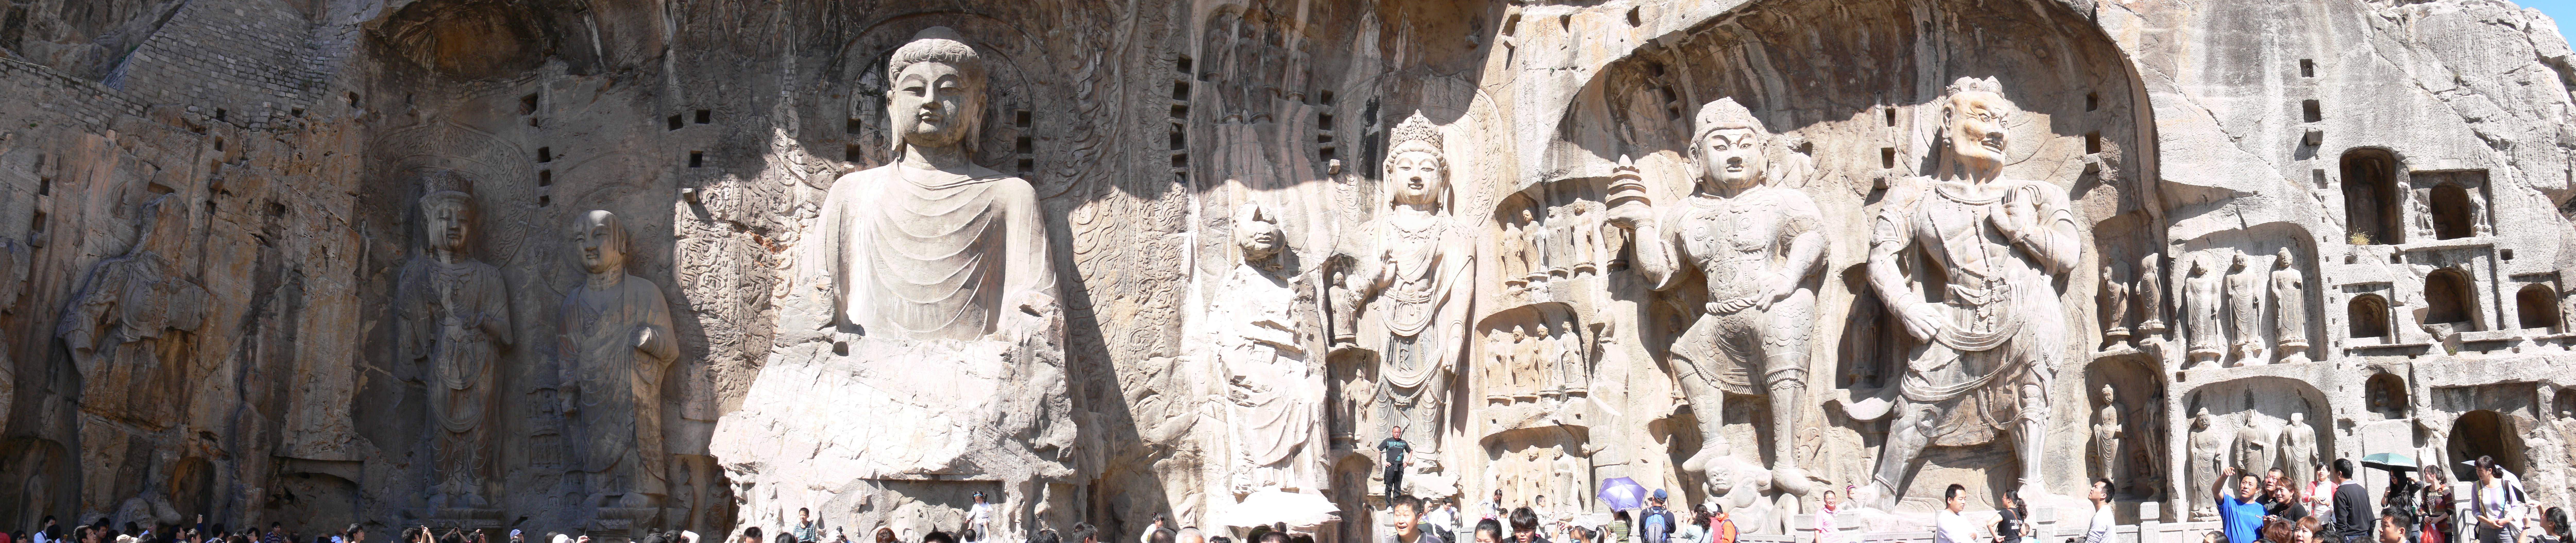 Gigantic carved sculptures of the Vairocana Buddha, an important Buddhist figure, adorn a mountain. Tourists stand in front of the sculptures, capturing photographs to commemorate their visit. The monumental scale of the sculptures and the presence of the tourists highlight the cultural significance and popularity of the site as a place of spiritual devotion and tourist attraction.